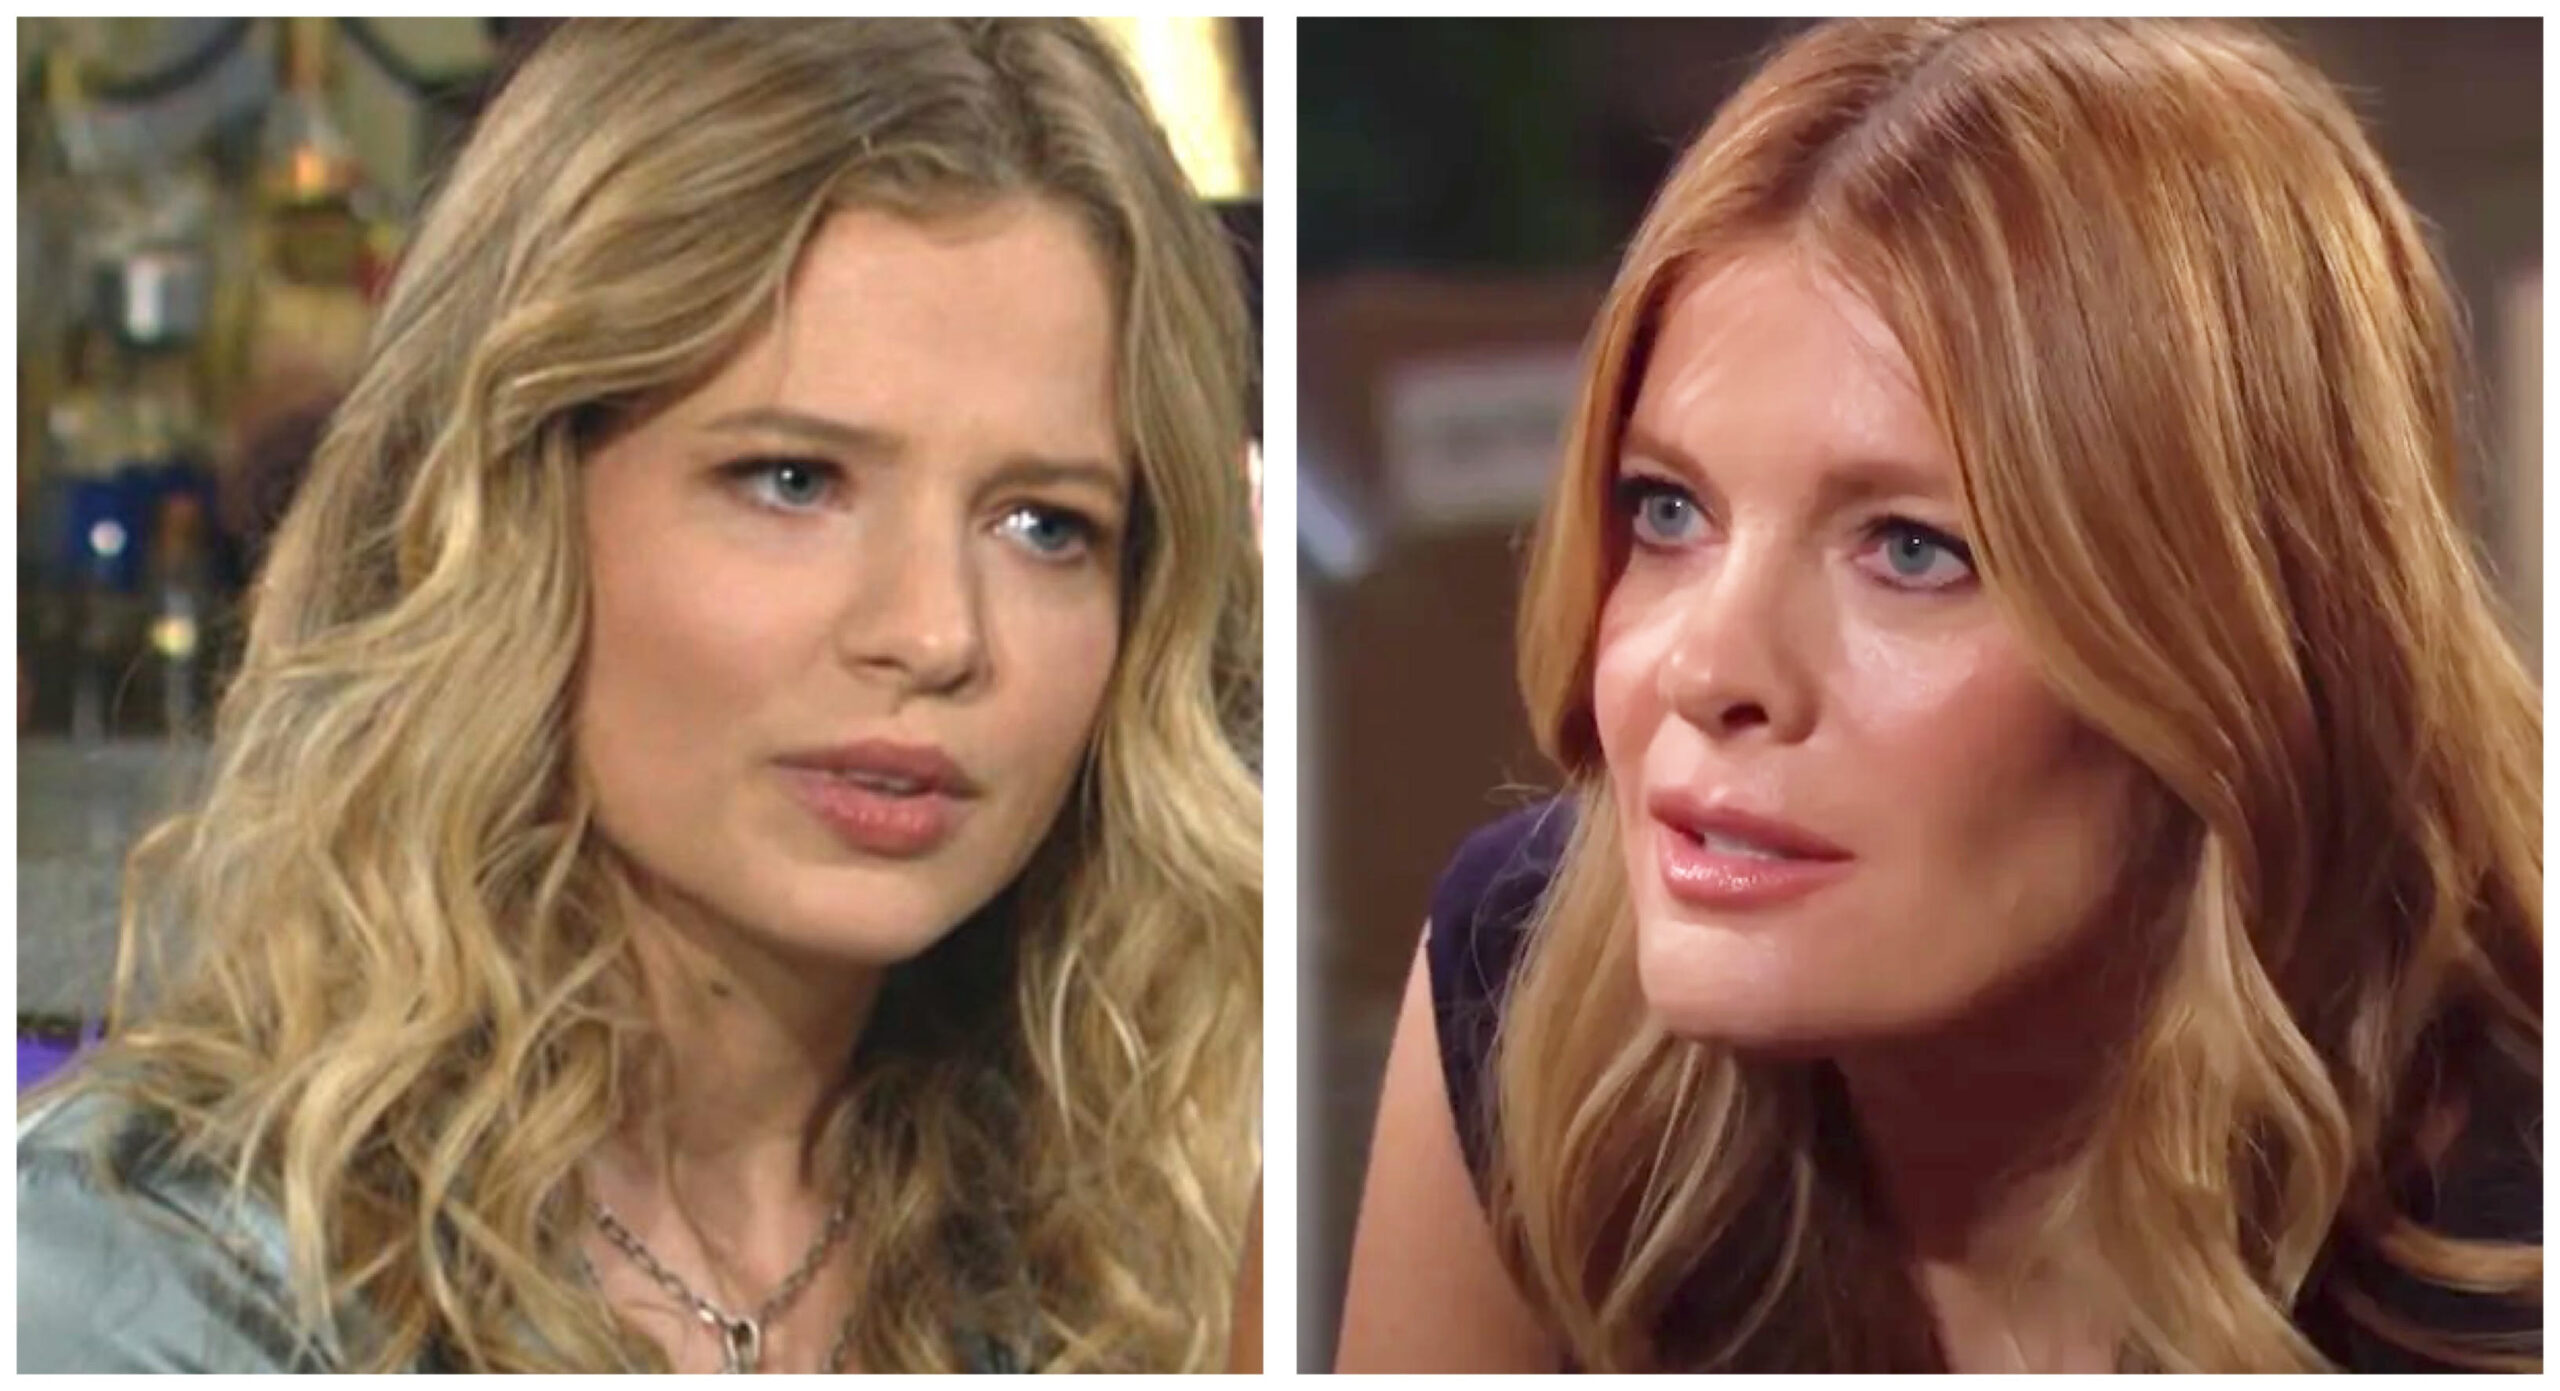 The Young and the Restless Spoilers featuring Summer Newman looking determined and Phyllis Summers appearing conflicted